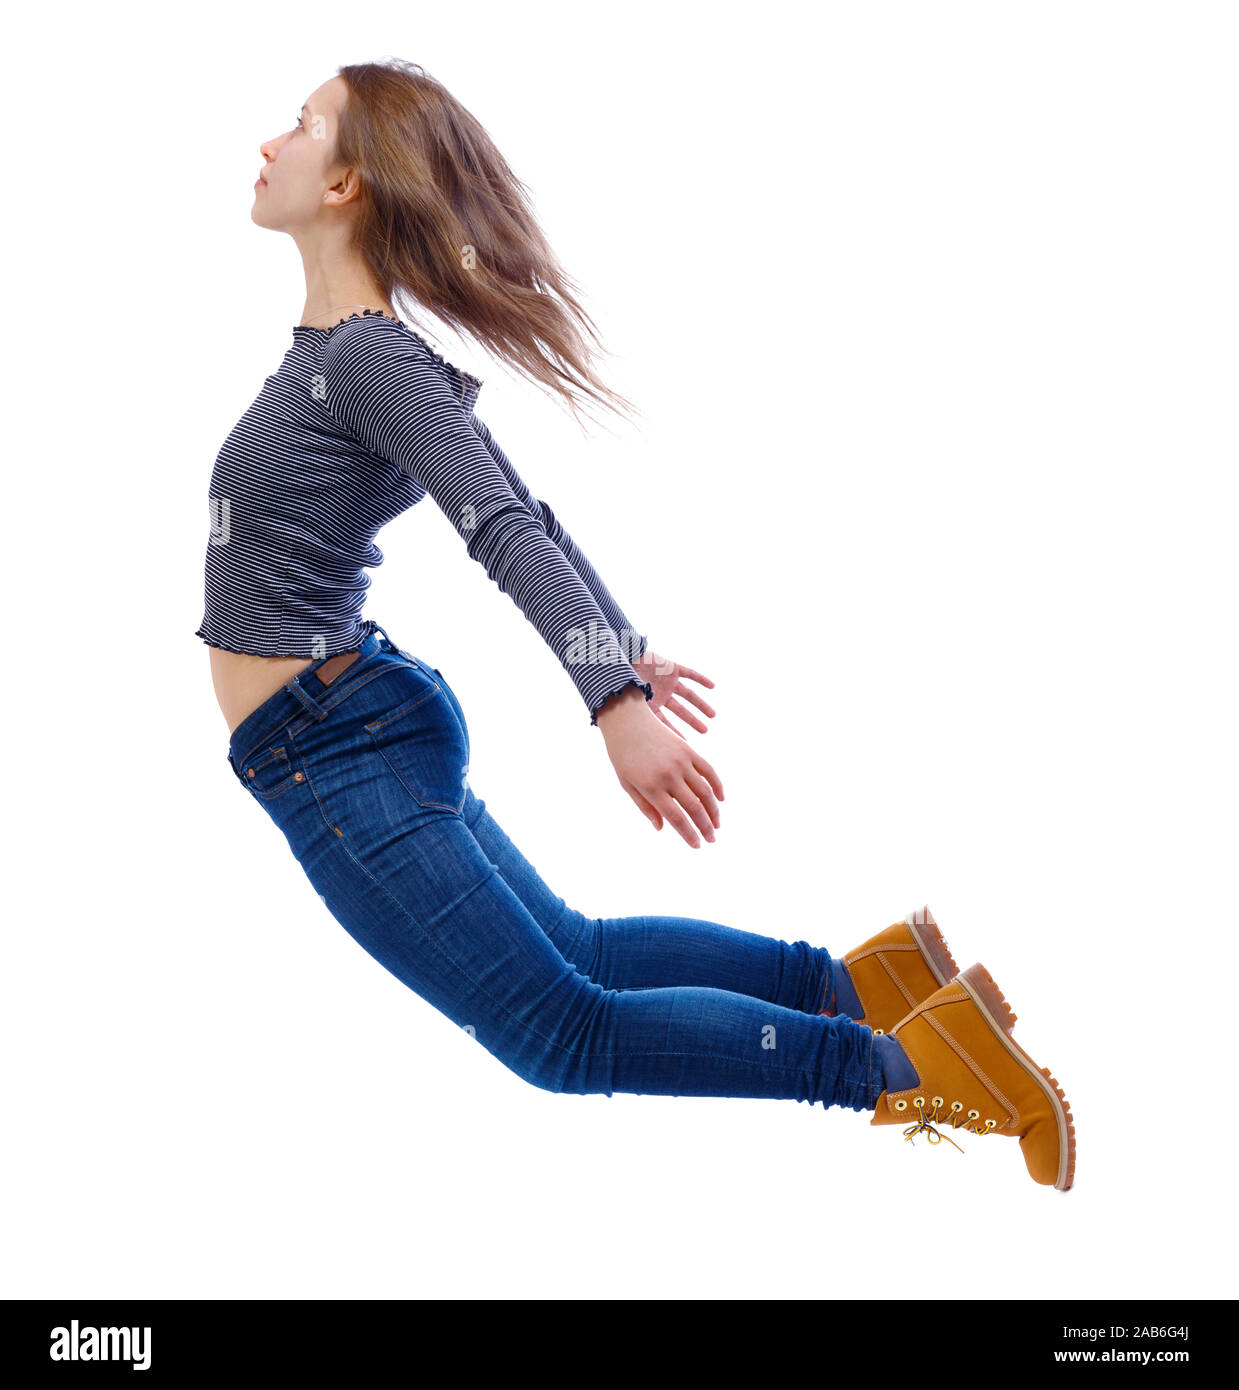 Side view of woman in zero gravity or a fall. girl is flying, falling or floating in the air. Side view people collection. side view of person. Isolat Stock Photo